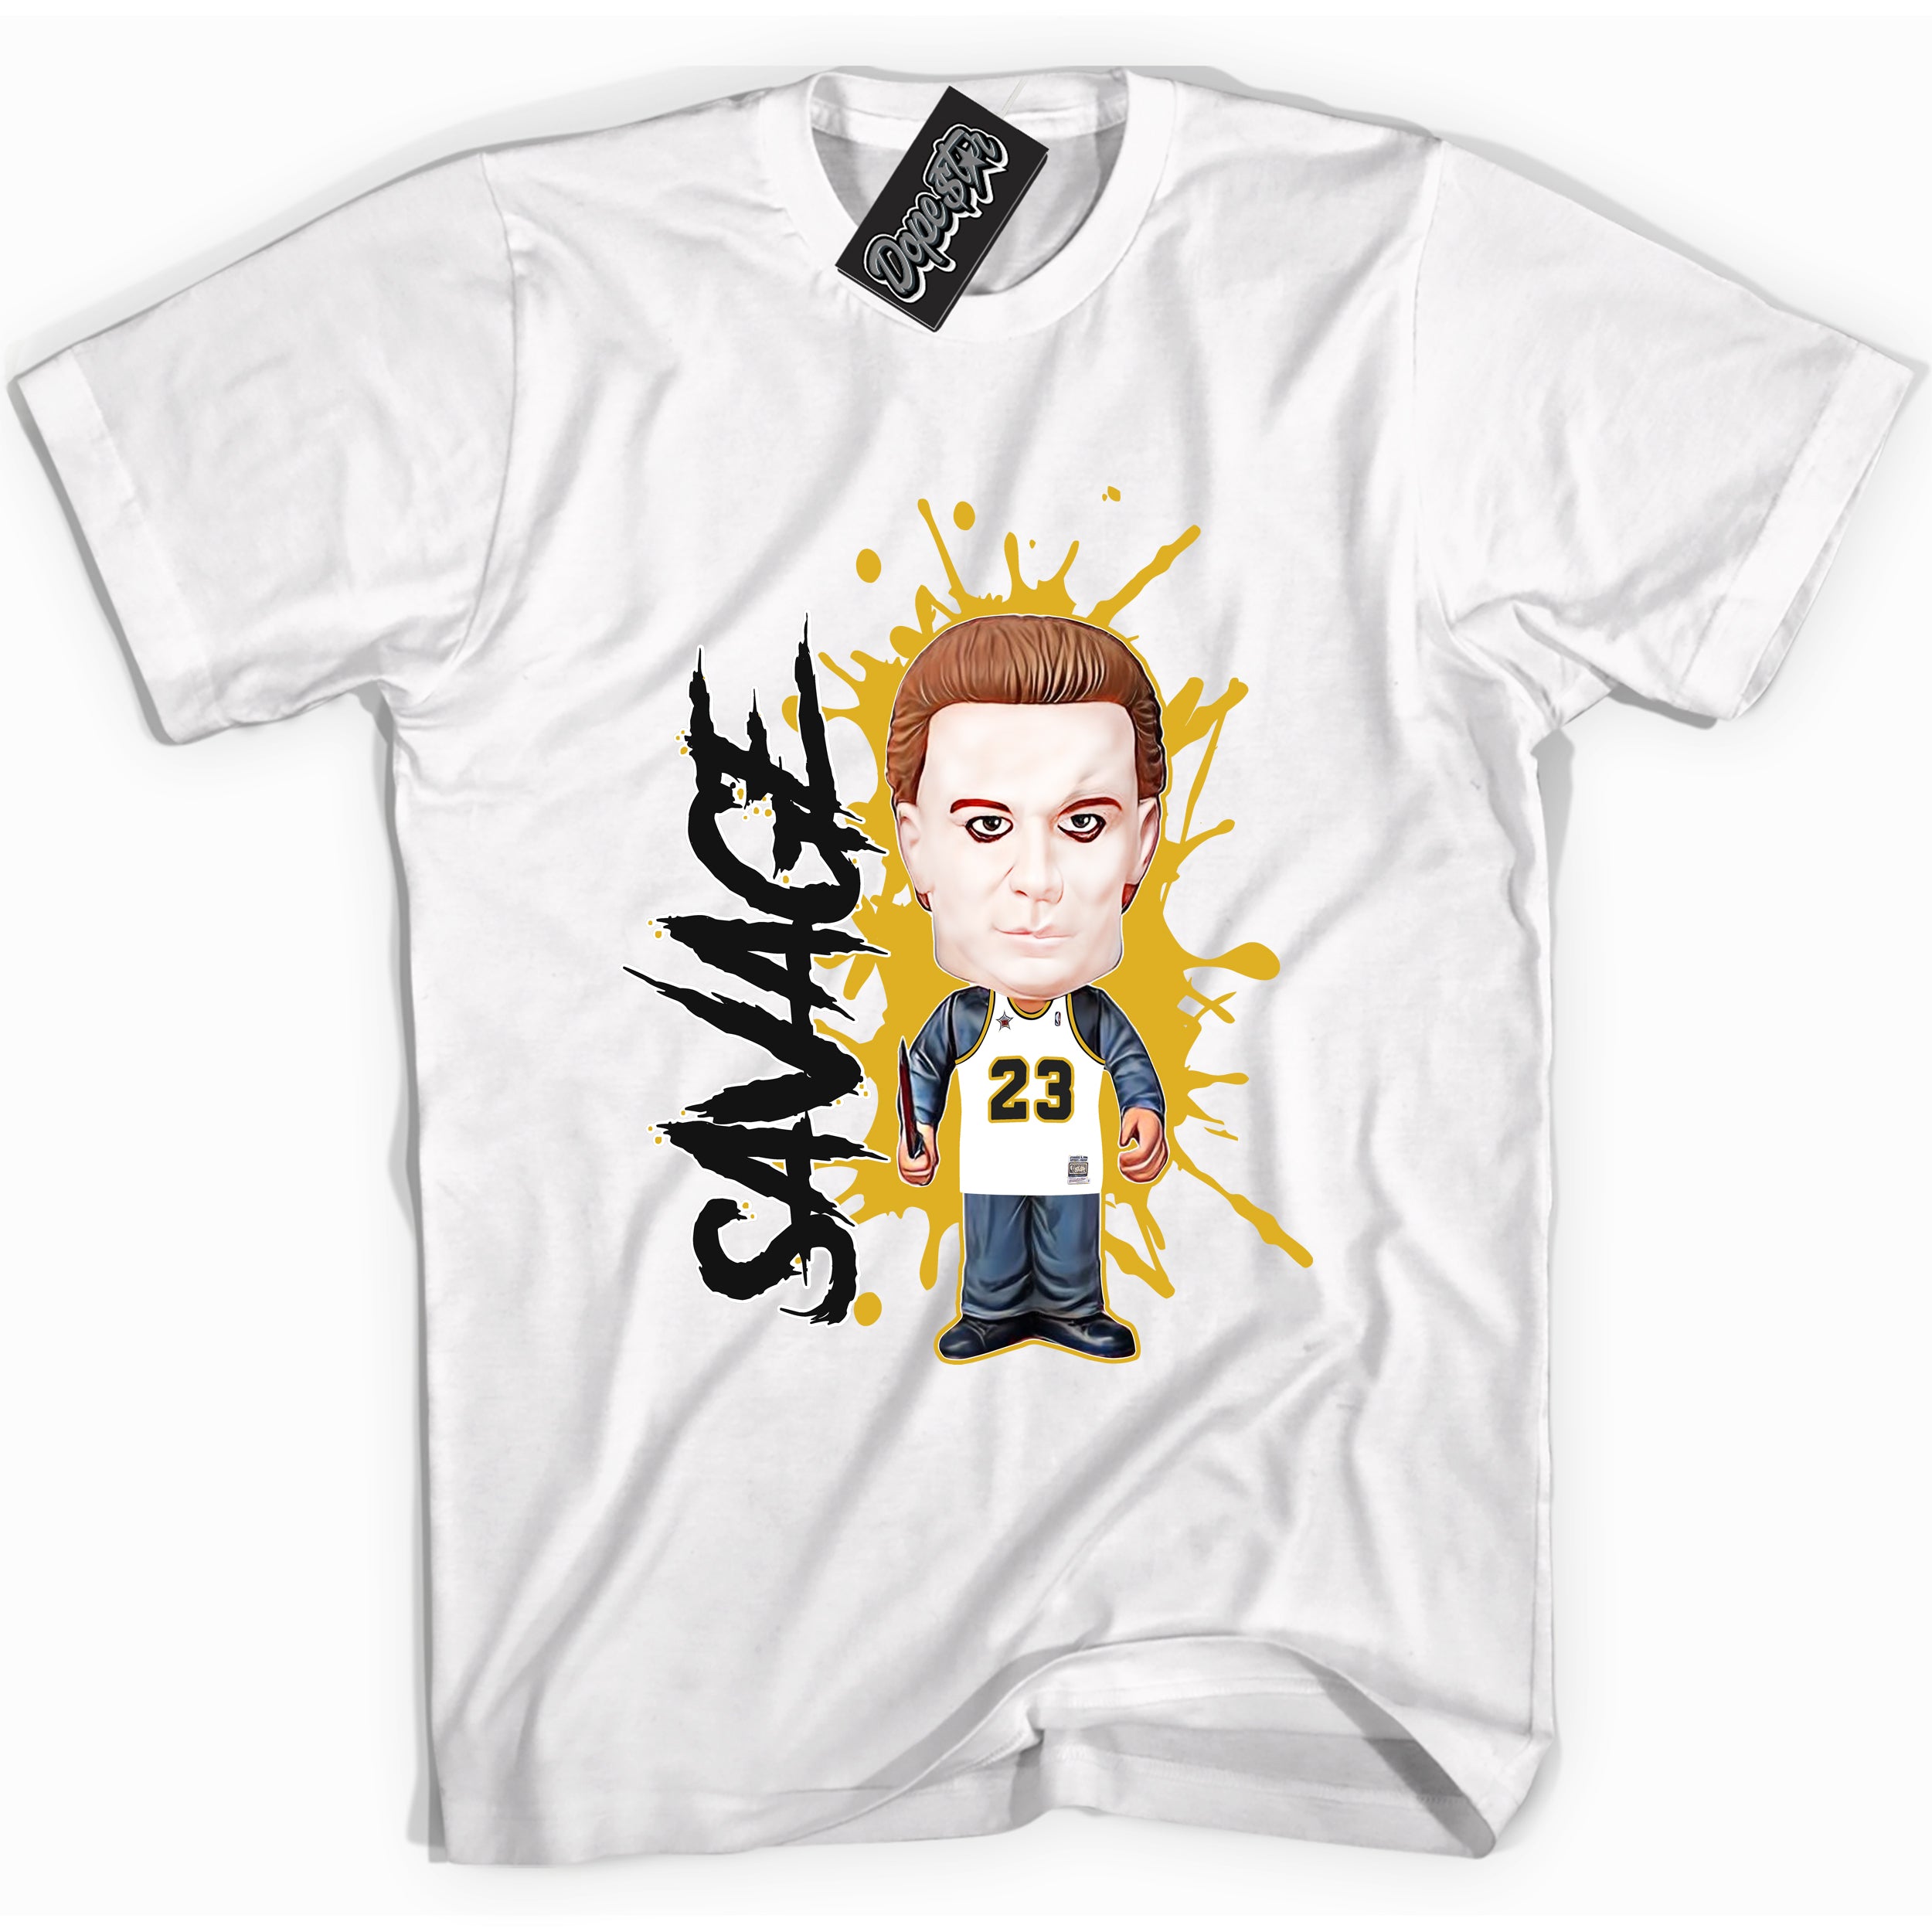 Cool White Shirt with “ Michael Myers Savage” design that perfectly matches Yellow Ochre 6s Sneakers.